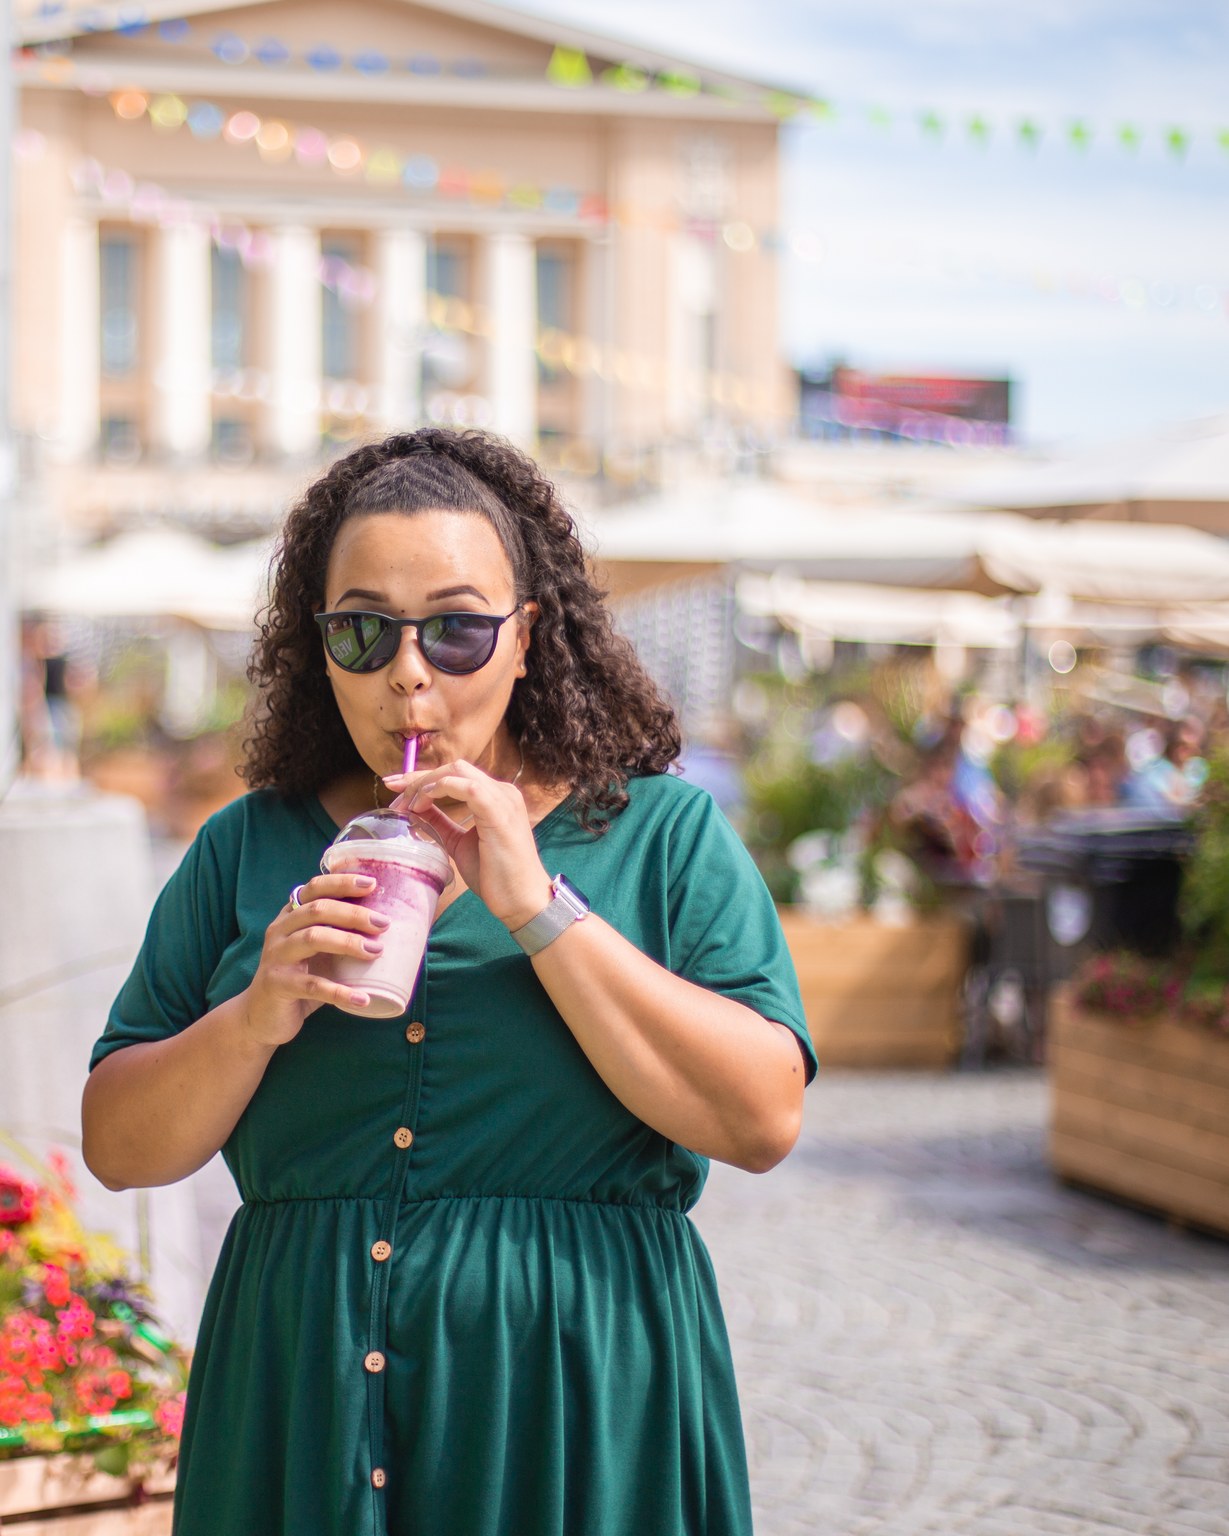 A person sipping a smoothie at the summer terrace restaurants.